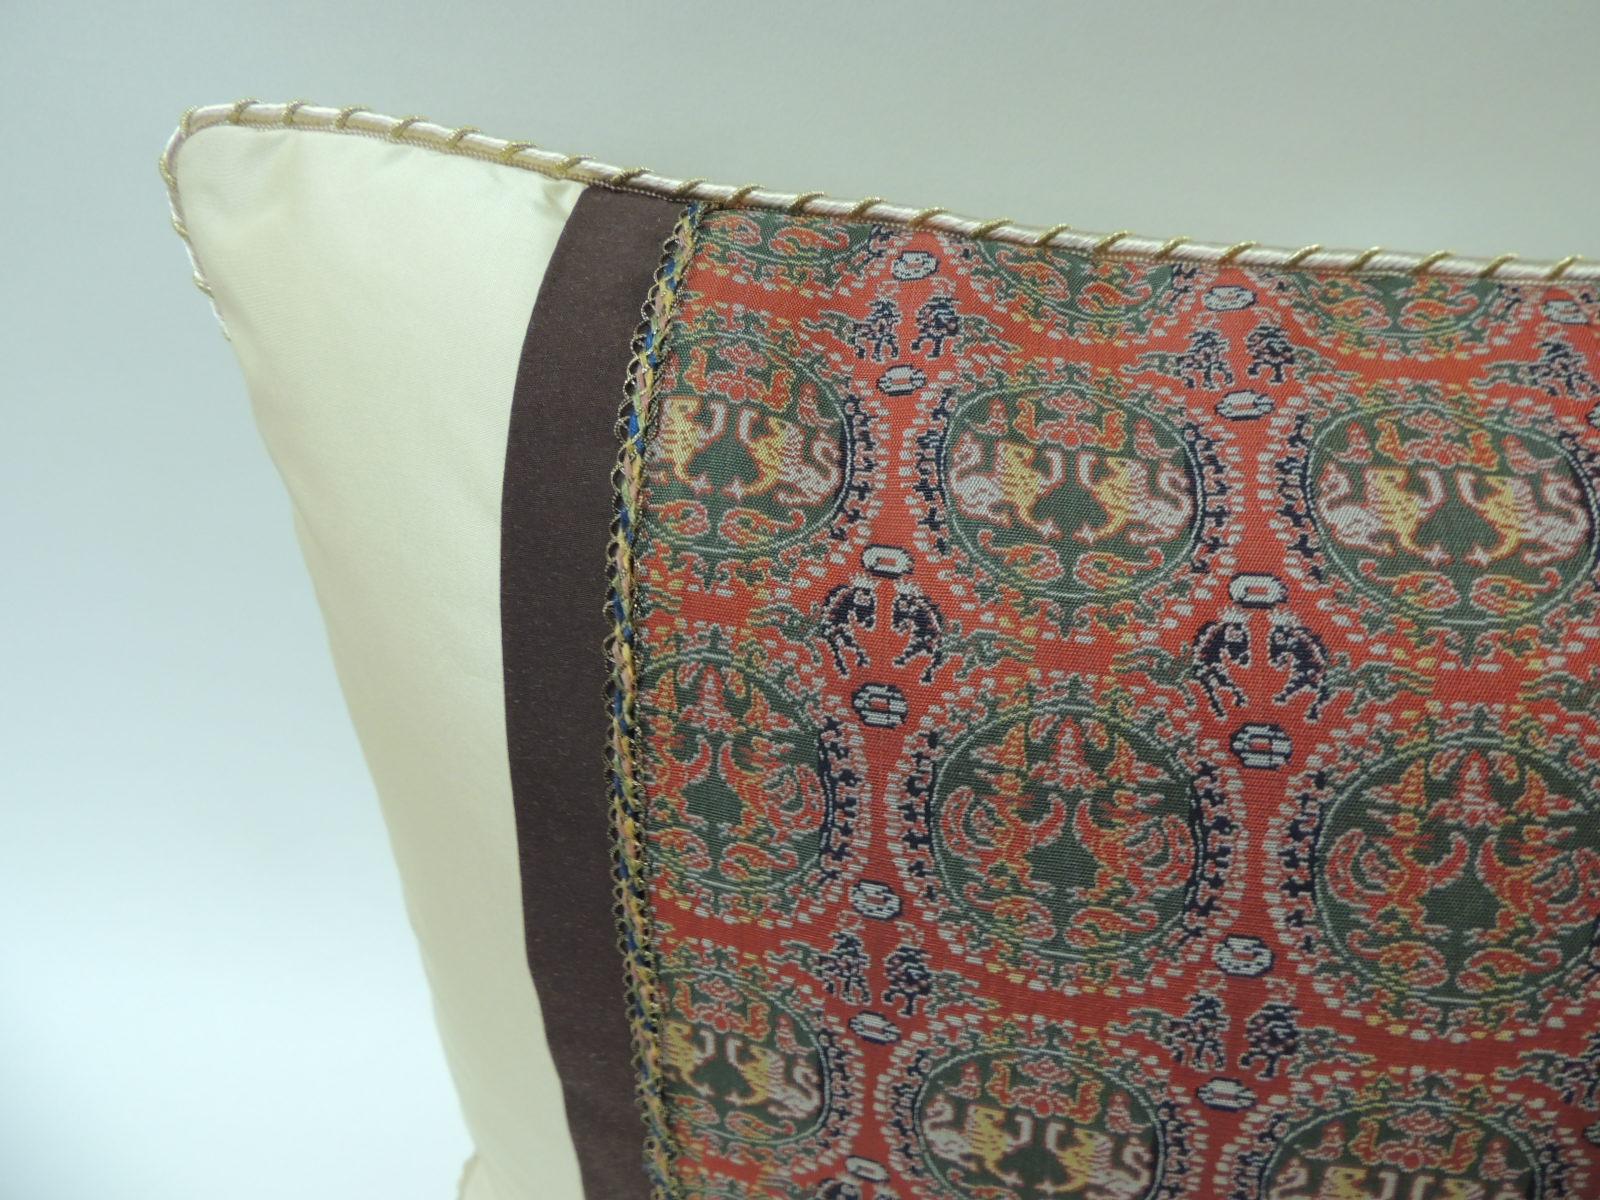 Japonisme Brocade with Circular Design of Tigers and Phoenixes Bolster Decorative Pillow